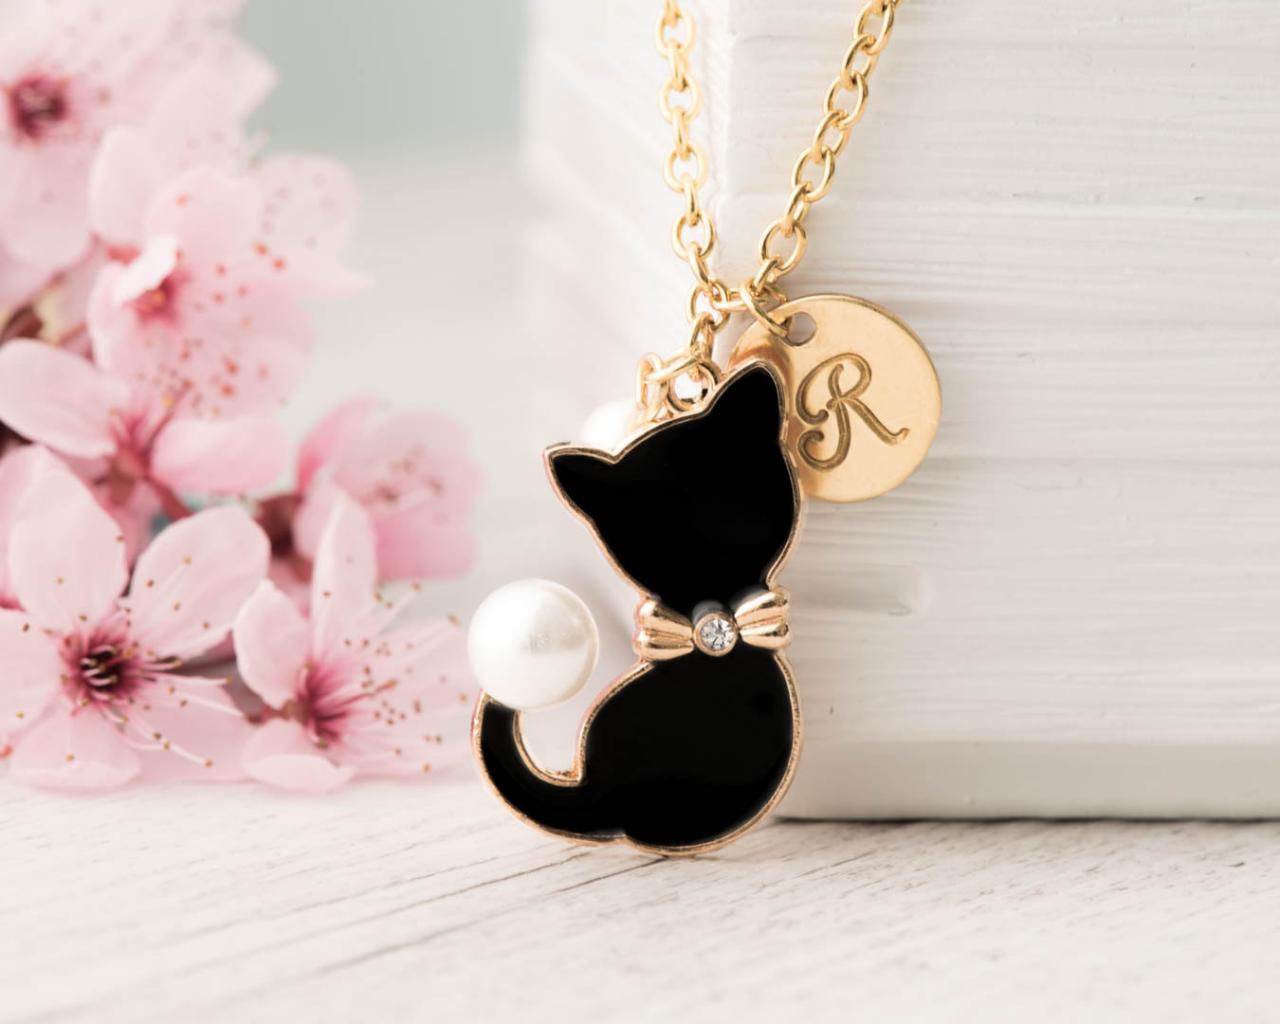 Custom Initial Engraved Black Cat Necklace, Gold Necklace With Birthstone Animal, Kitties Pendant With Always In My Heart Note As Pet Lover